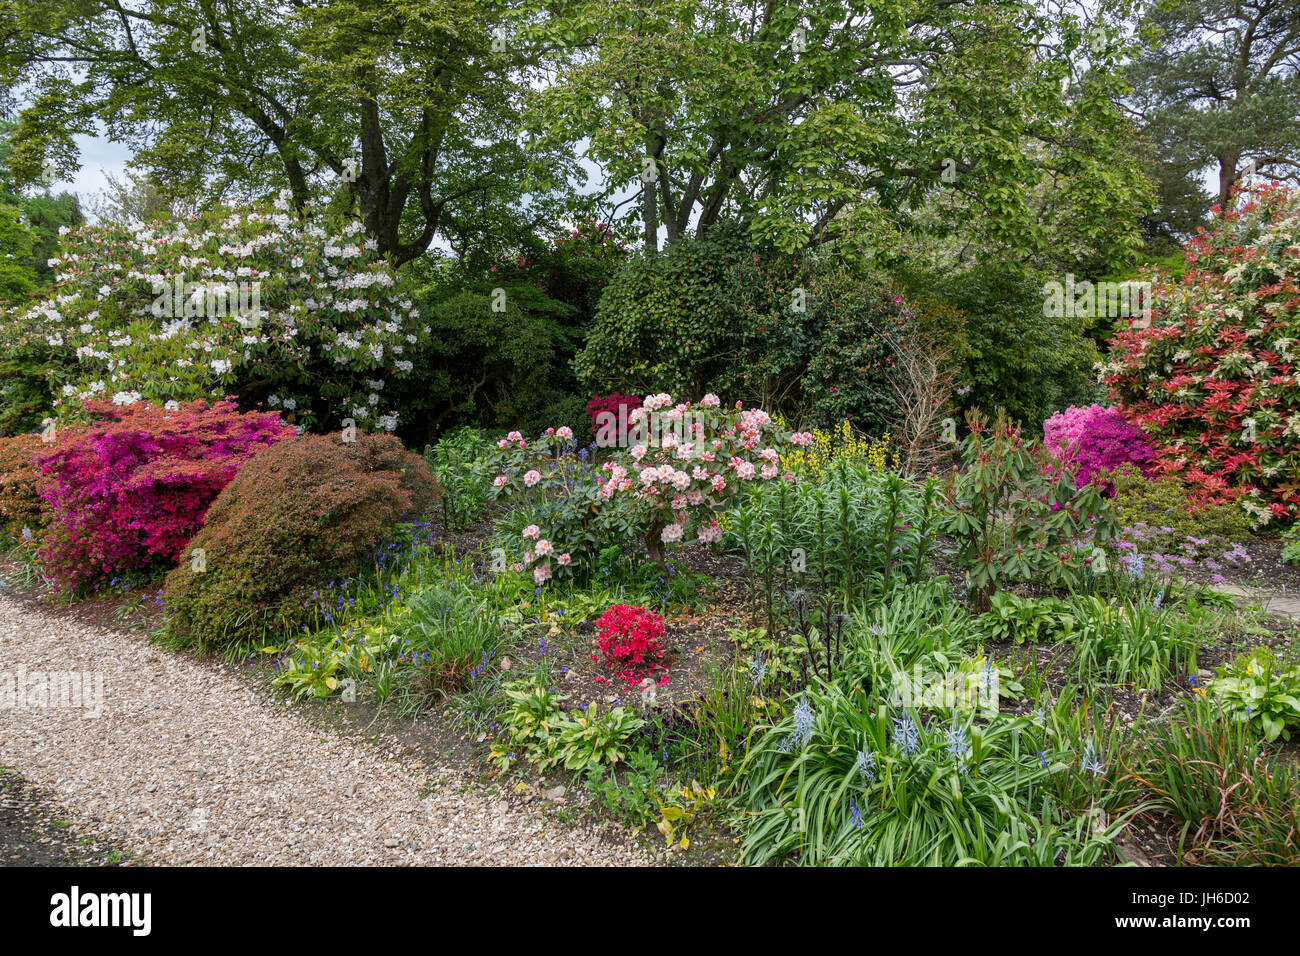 A collection of shrubs that prefer acidic soil such as rhododendron and azaleas in the gardens at Forde Abbey, Dorset, England, UK Stock Photo